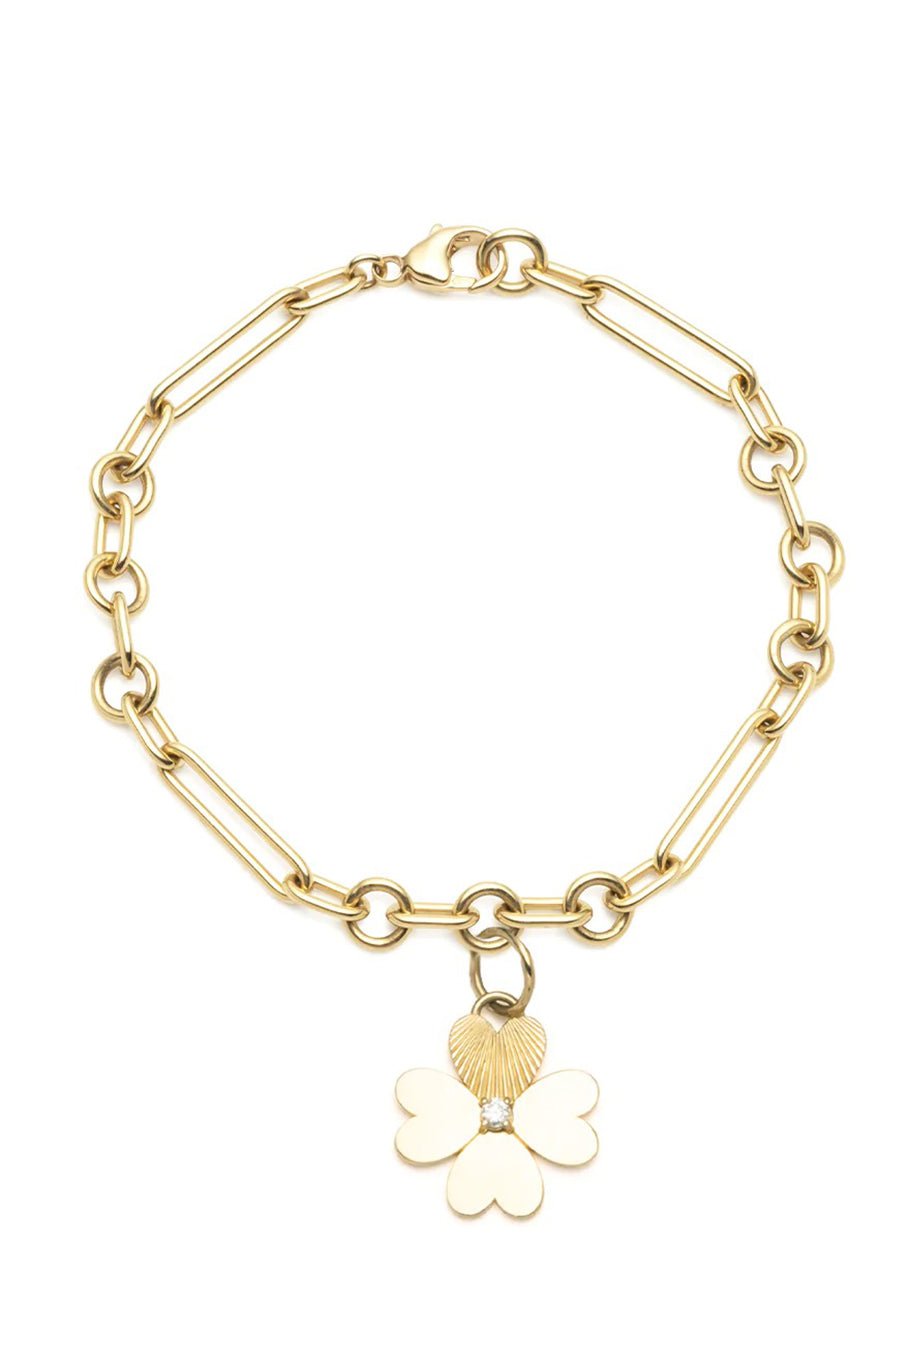 FOUNDRAE-Small Clover Mix Clip Bracelet-YELLOW GOLD